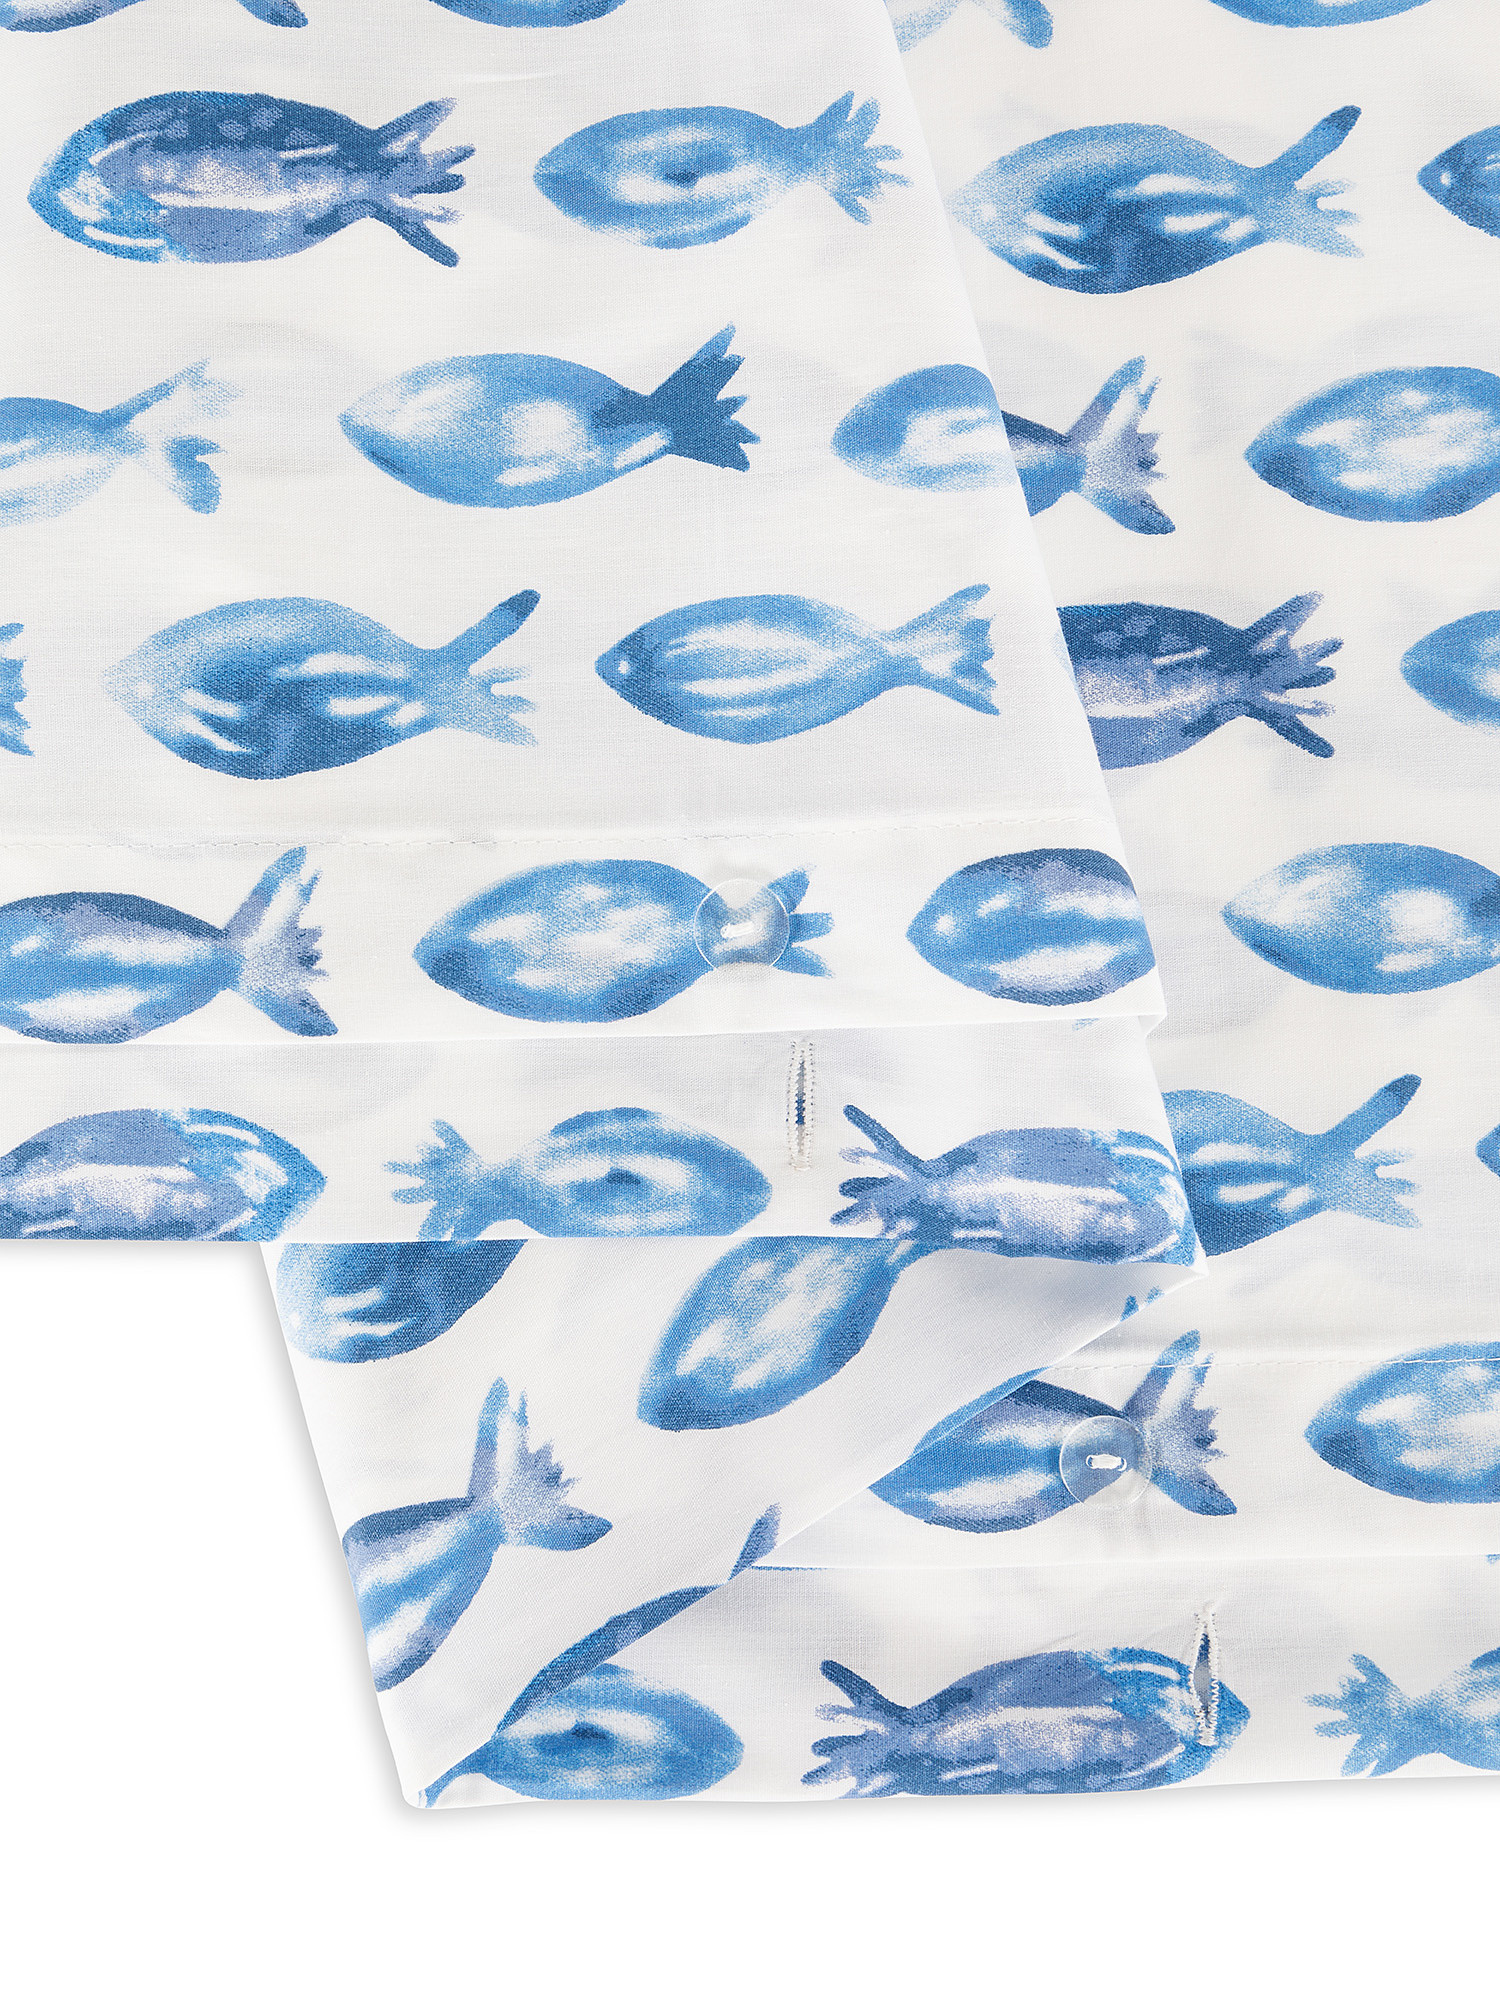 Fish patterned cotton percale sheet set, White, large image number 2